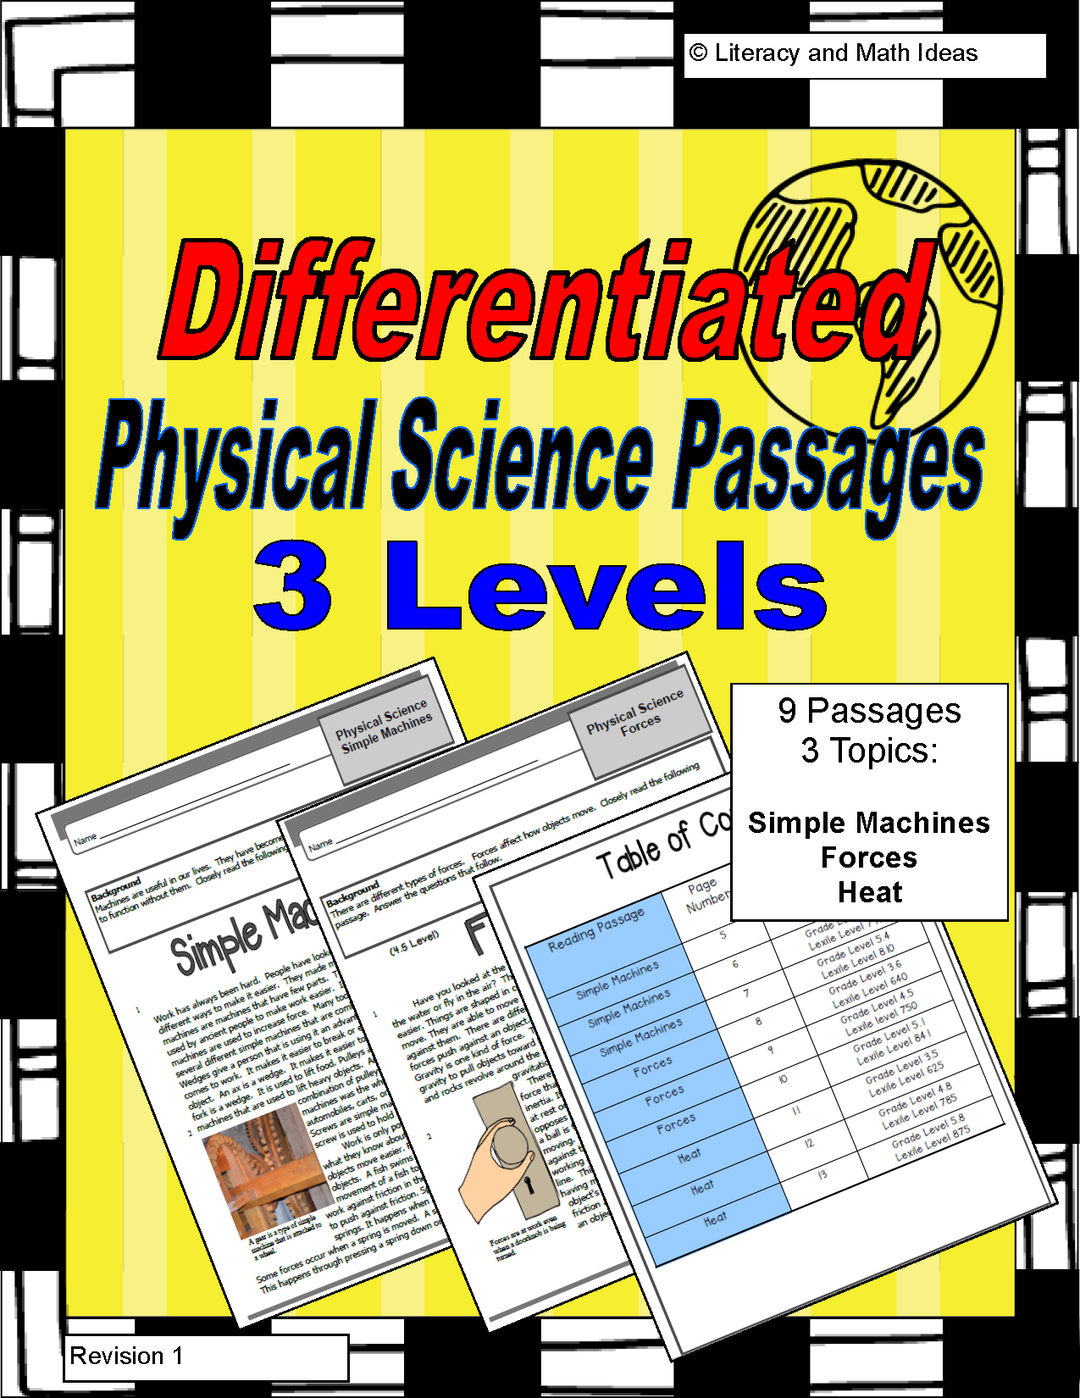 Physical Science Passages Differentiated (Lexiles 649-875)